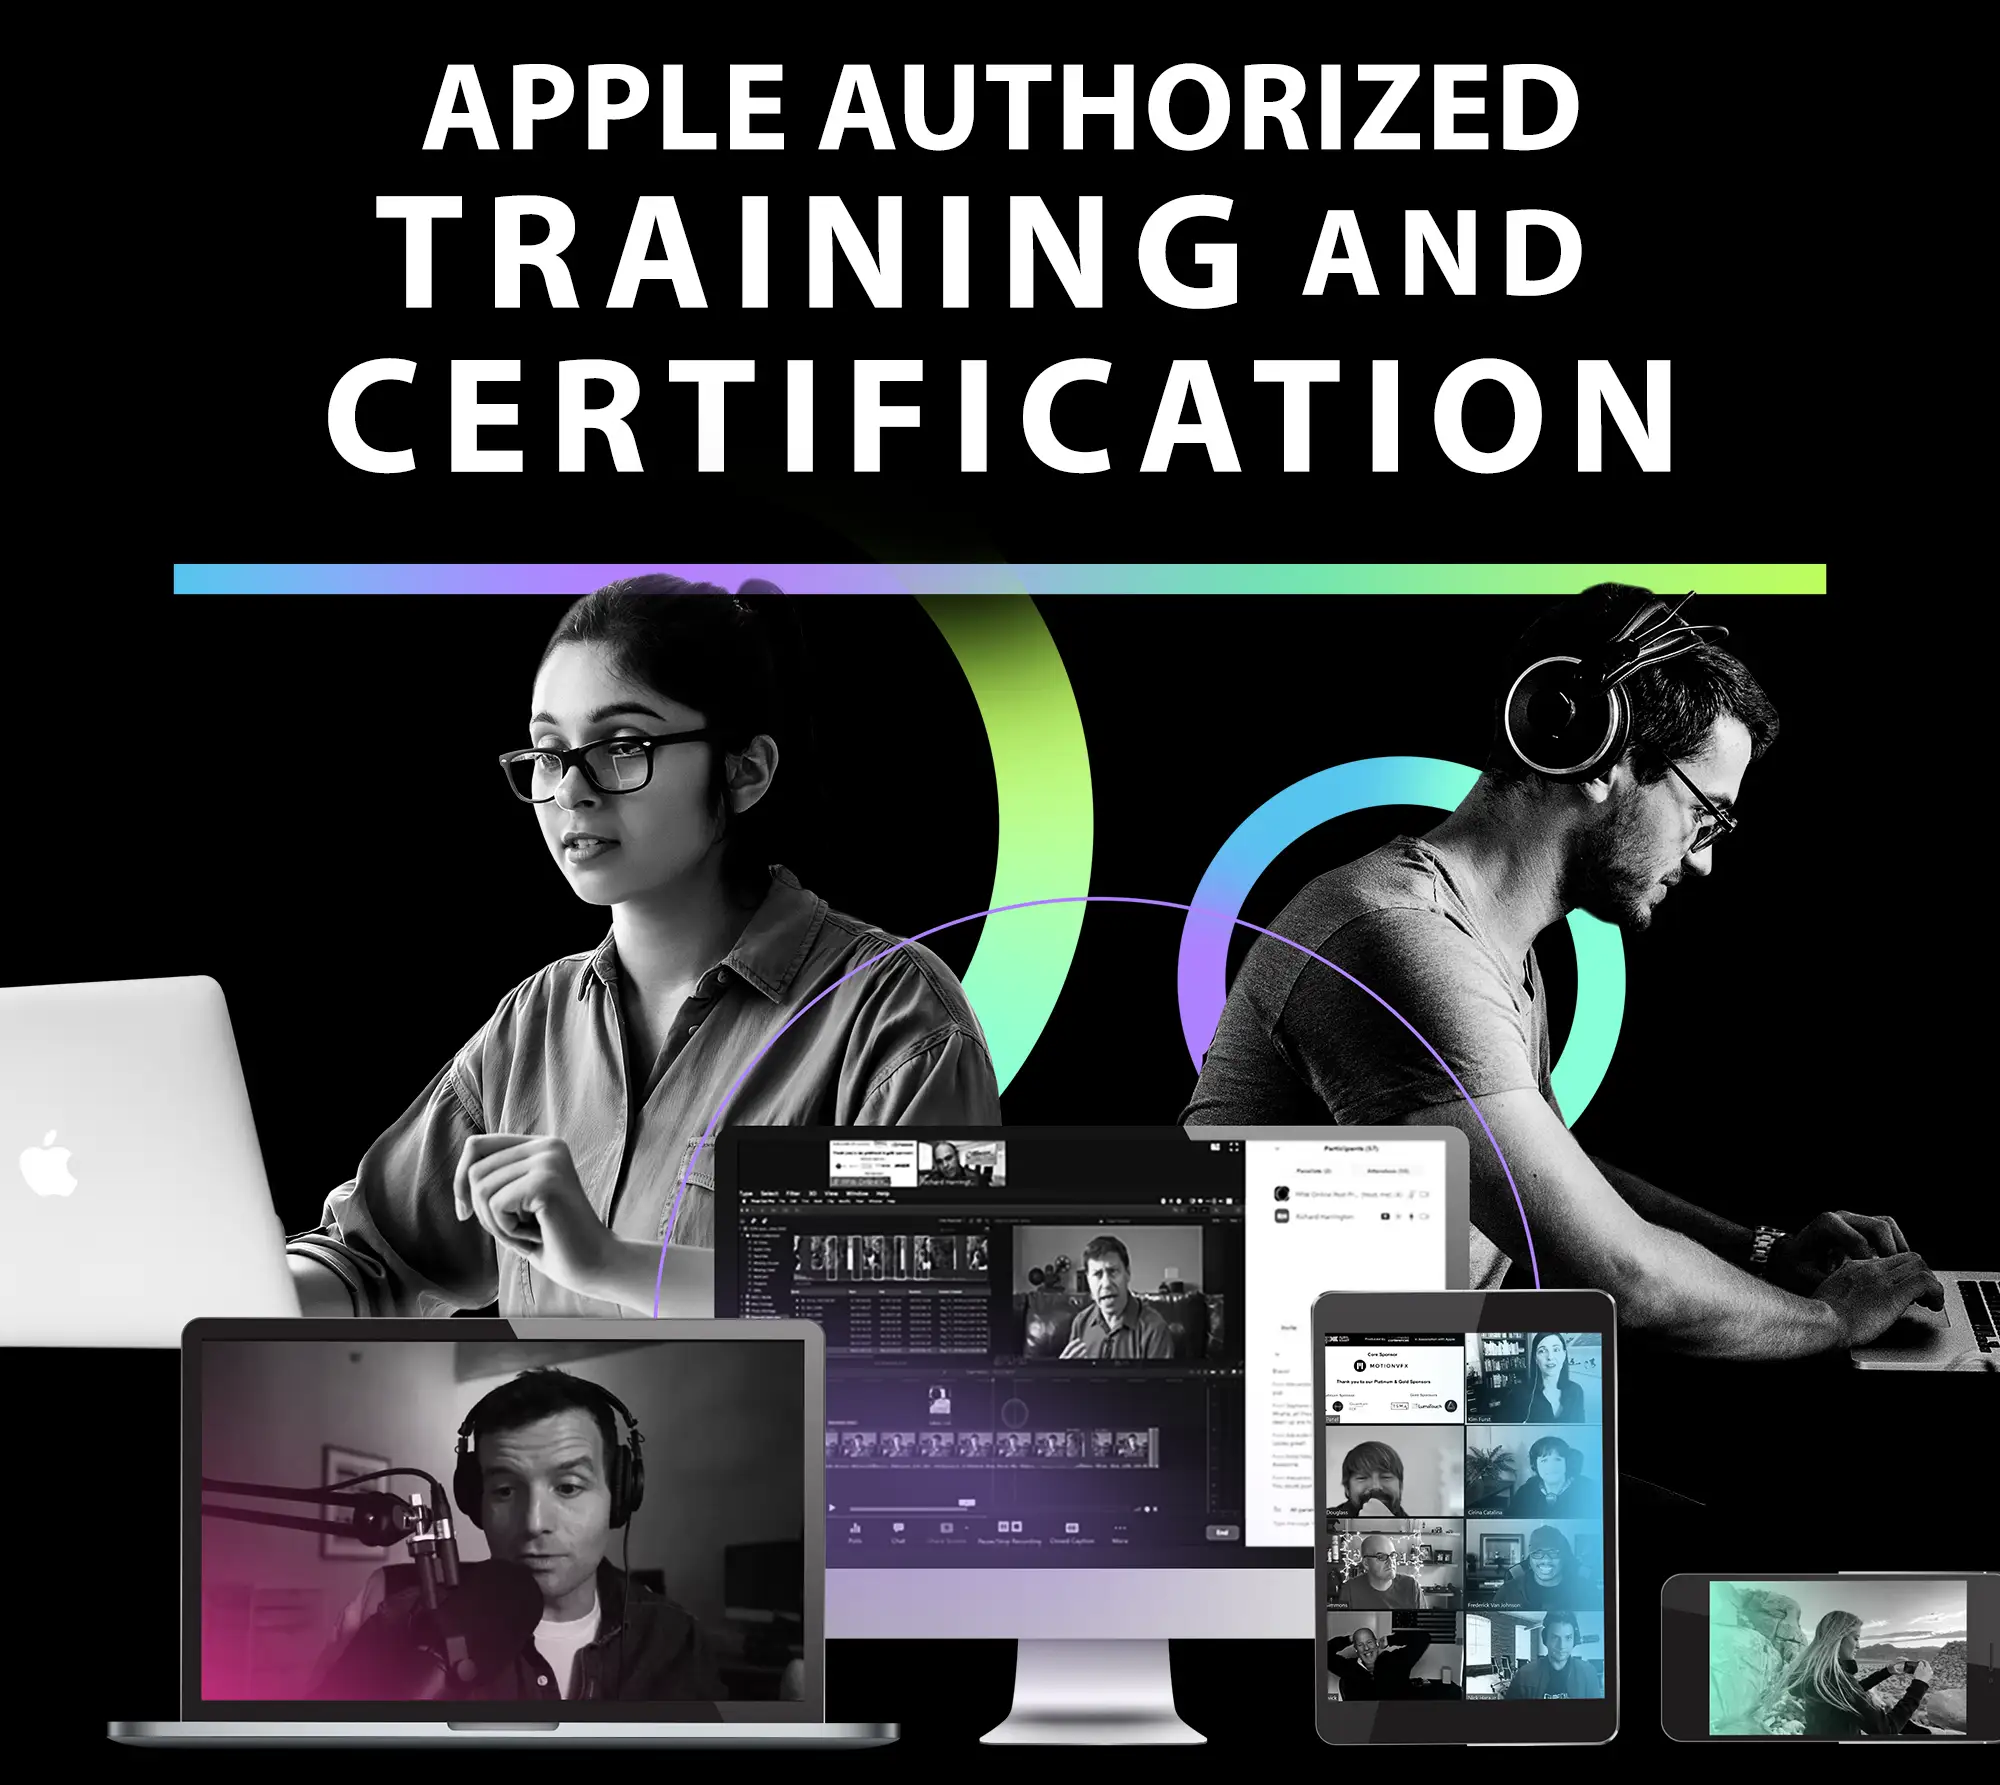 Apple Auhtorized Training and Certifications - image collage